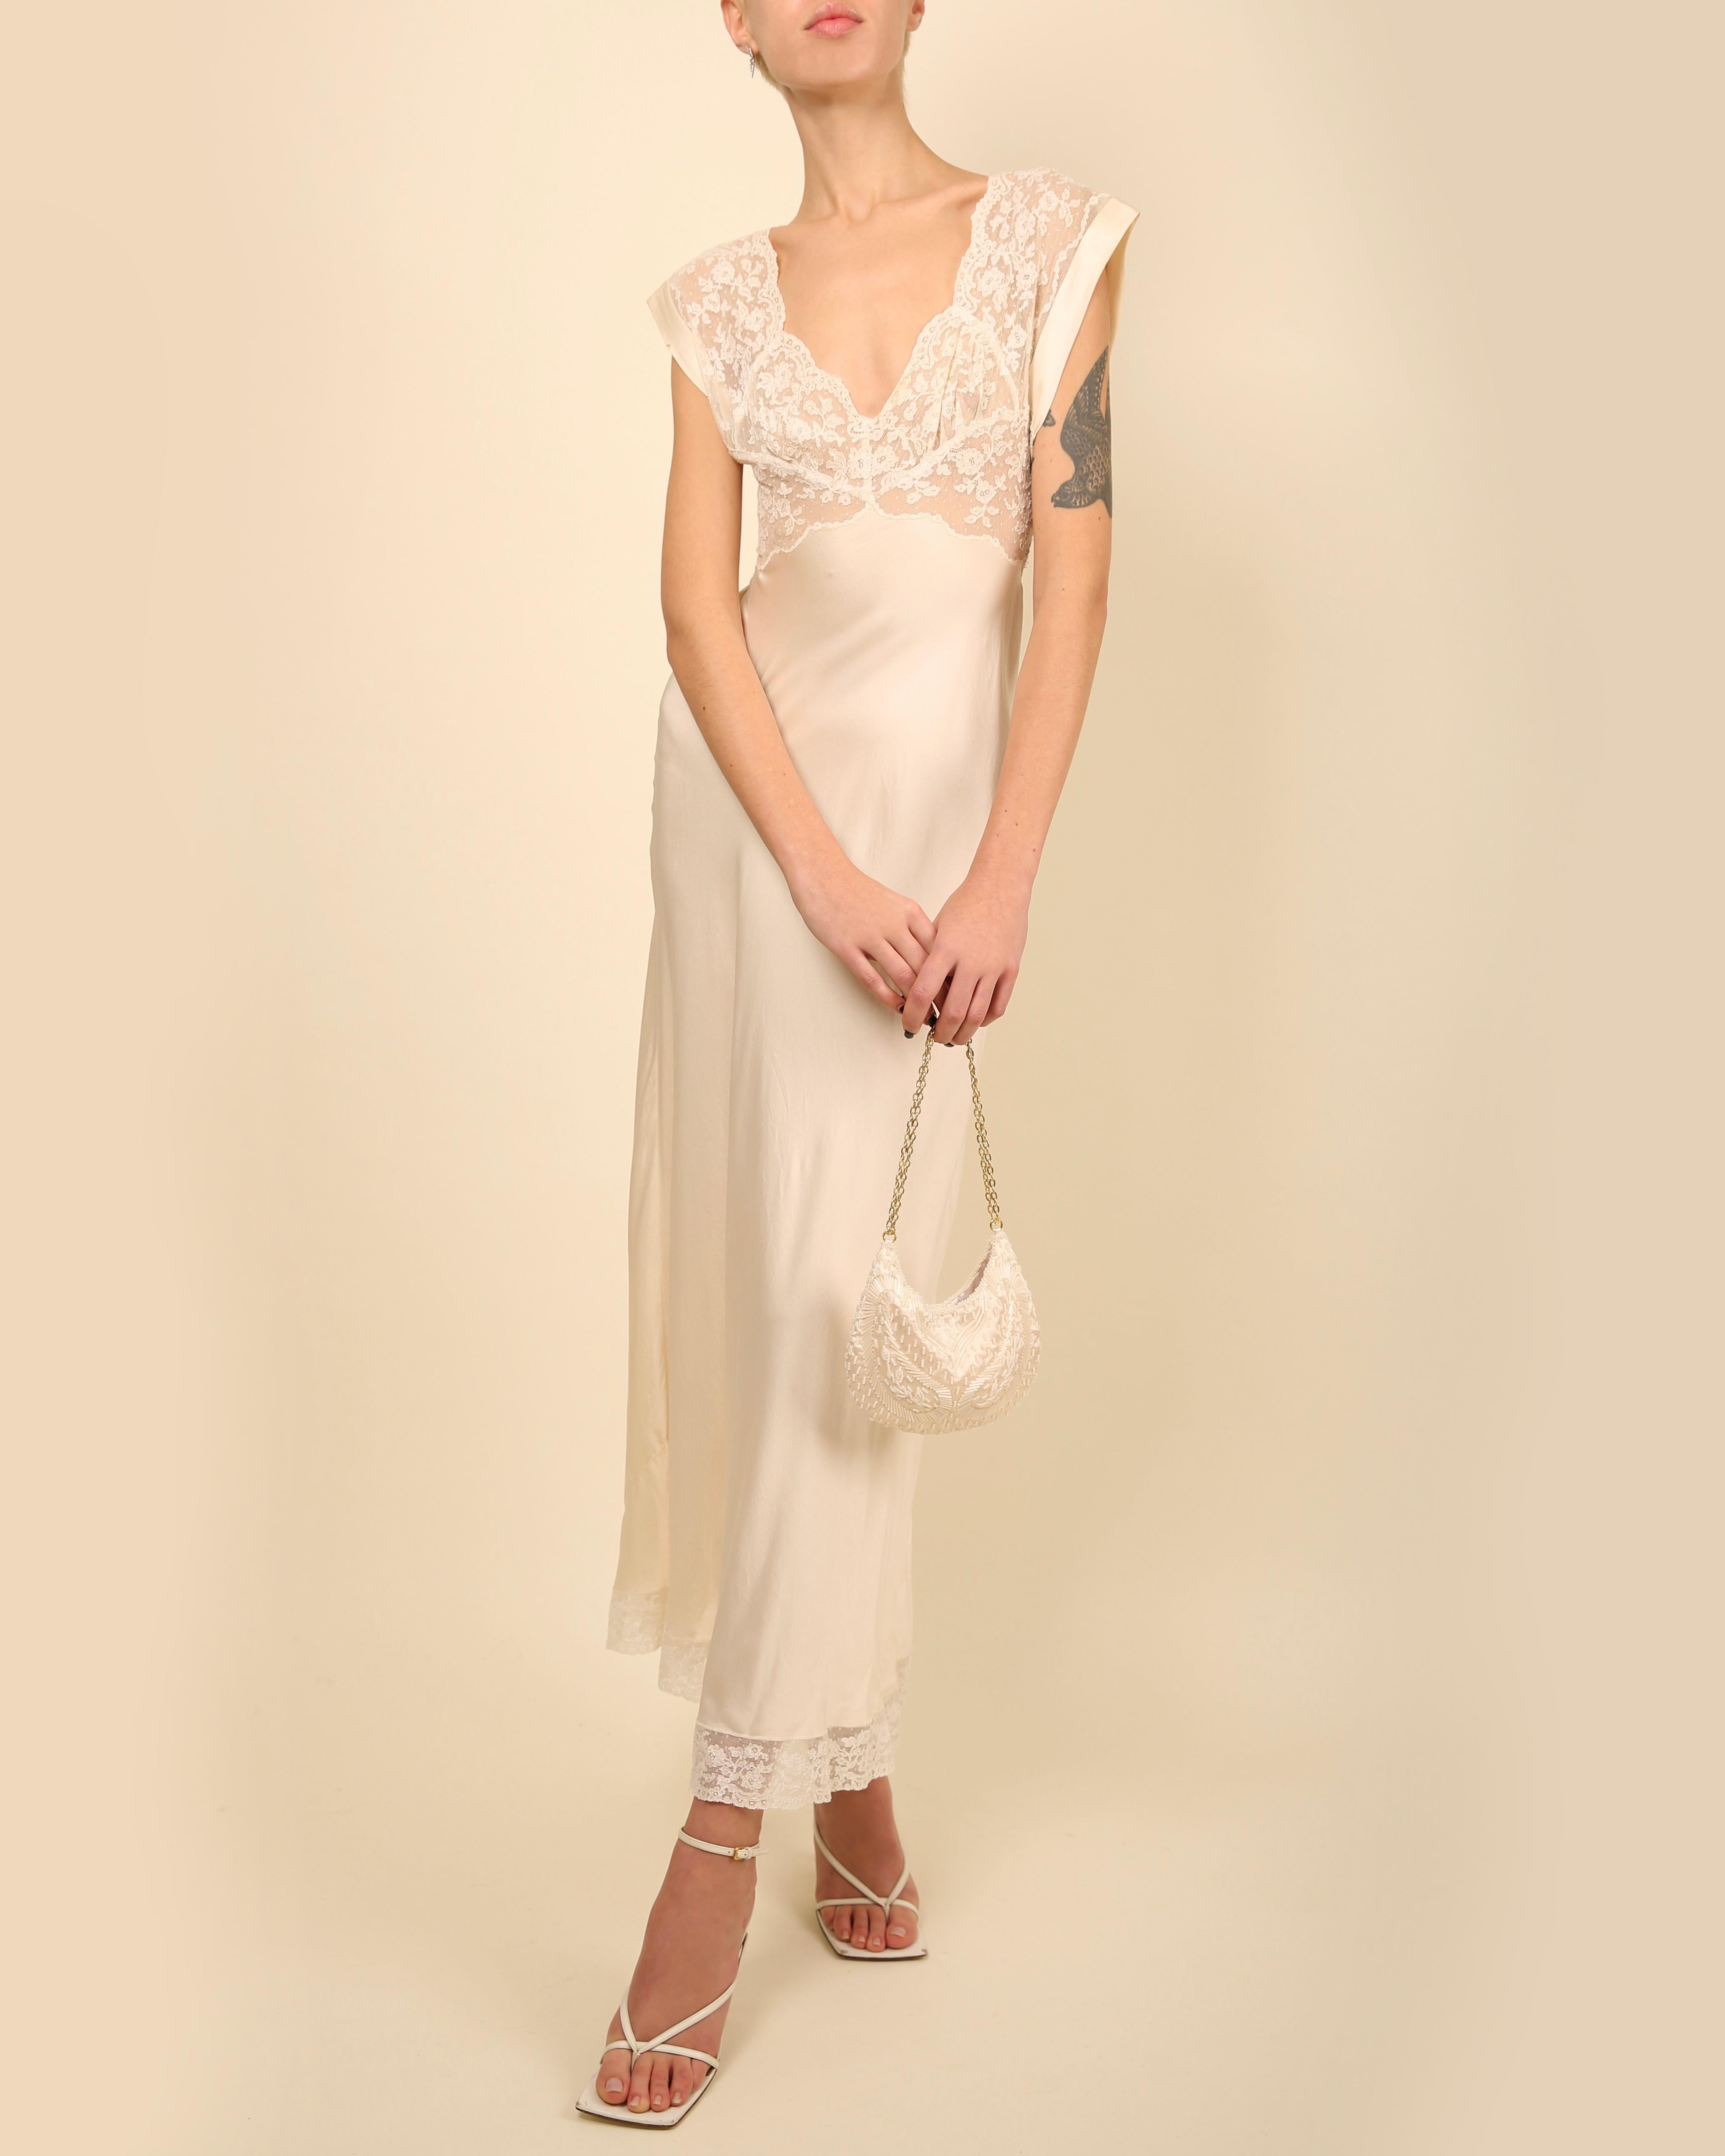 A very rare vintage night gown from Heavenly Silk Lingerie by Fischer 
Circa 1930's
Cream silk maxi dress with white floral lace bust and hem
The bust is semi sheer so to wear this as an evening dress you could opt for a white lace bra underneath or